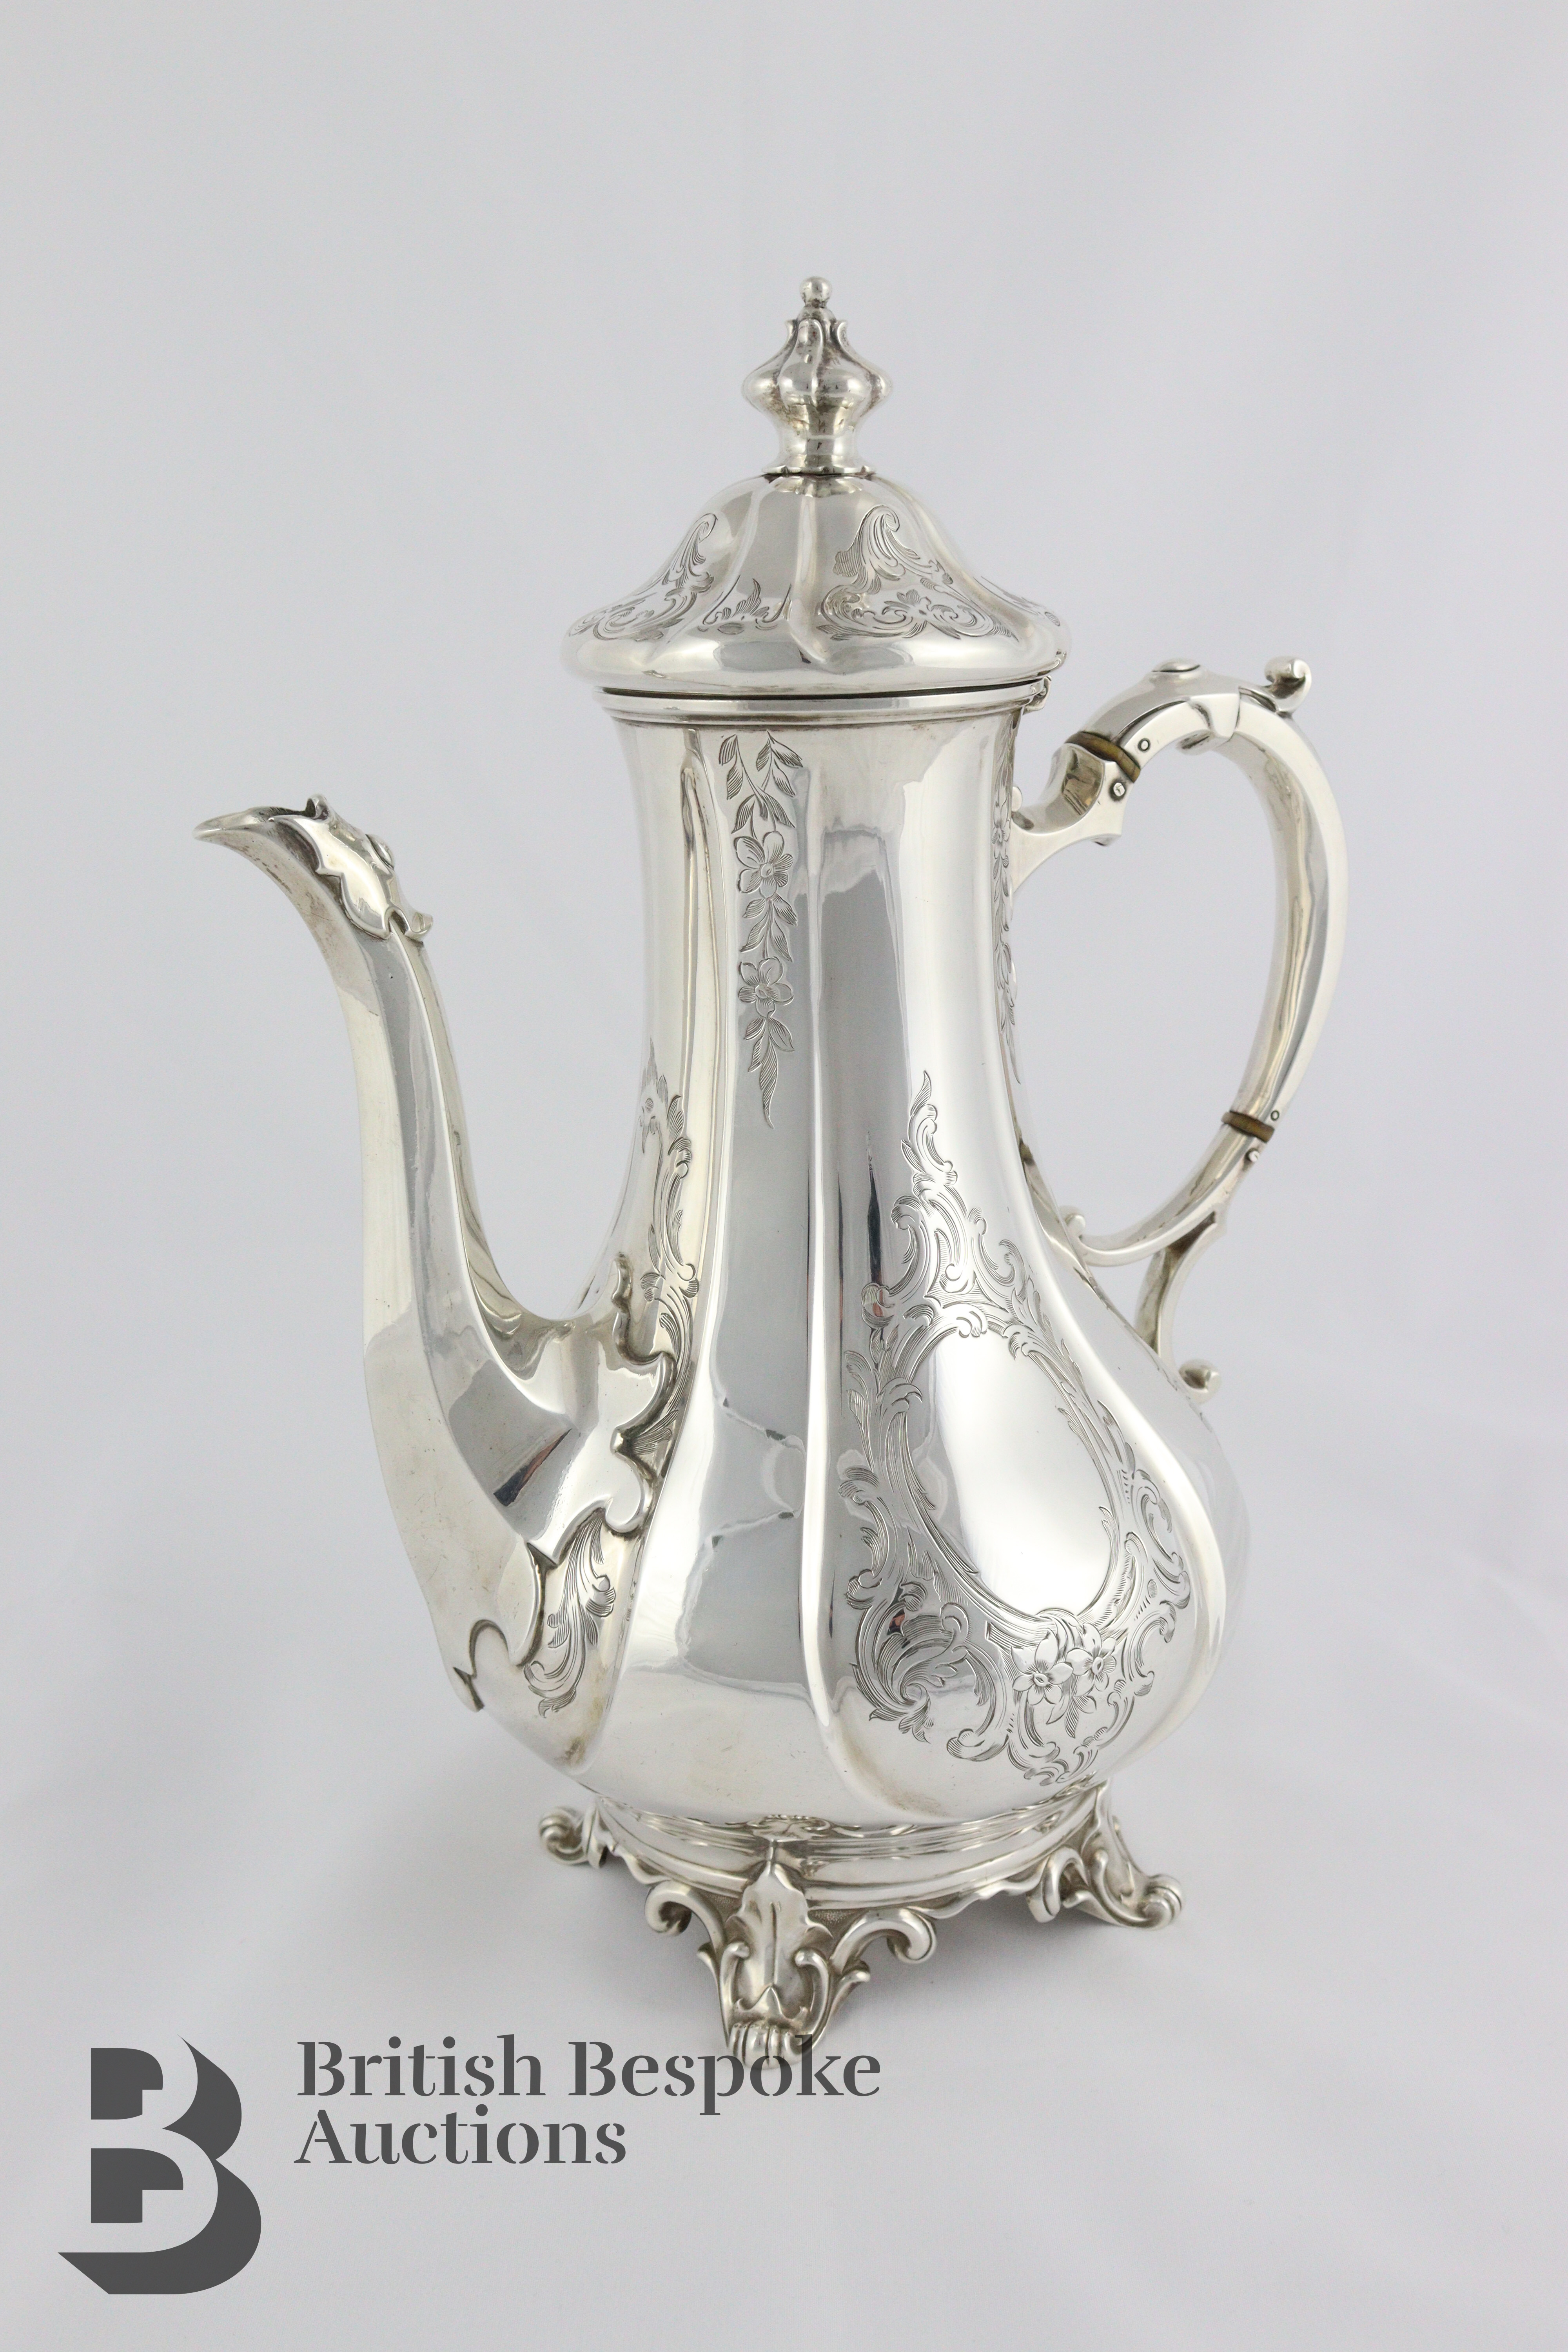 Victorian Silver Coffee Pot - Image 2 of 8